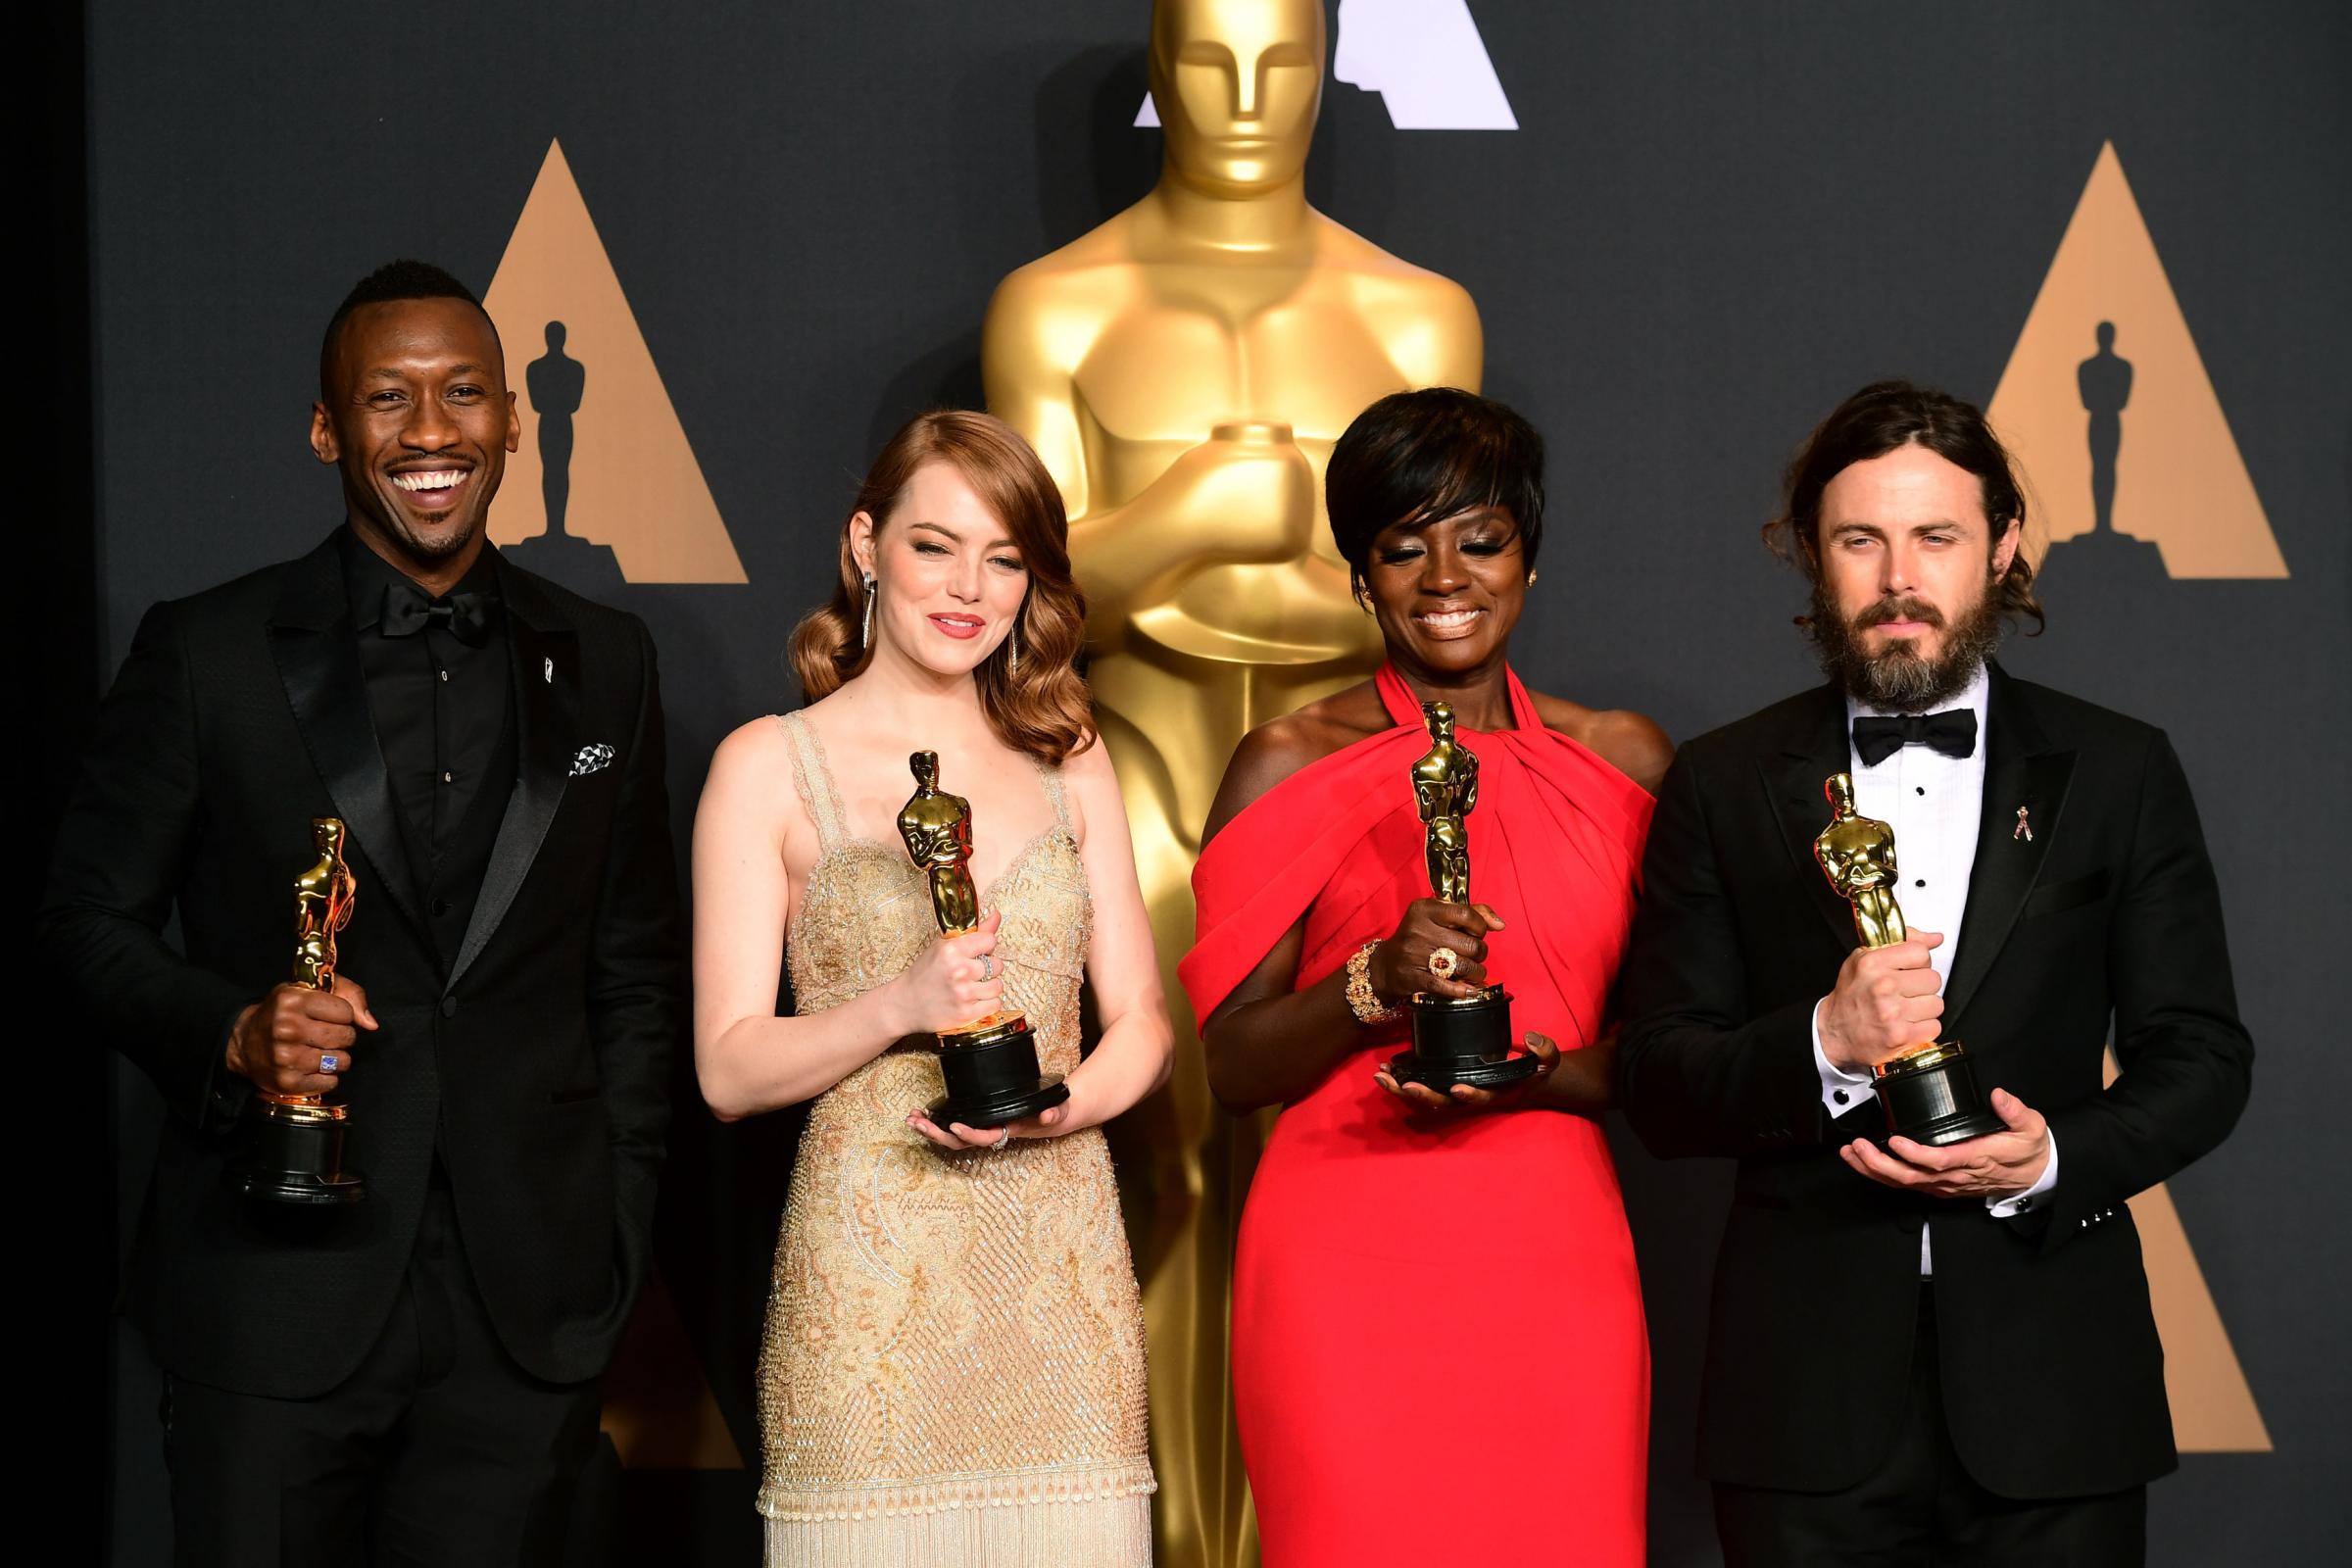 Confusion triumphs as La La Land mistakenly announced best picture prize winner over Moonlight at Oscars